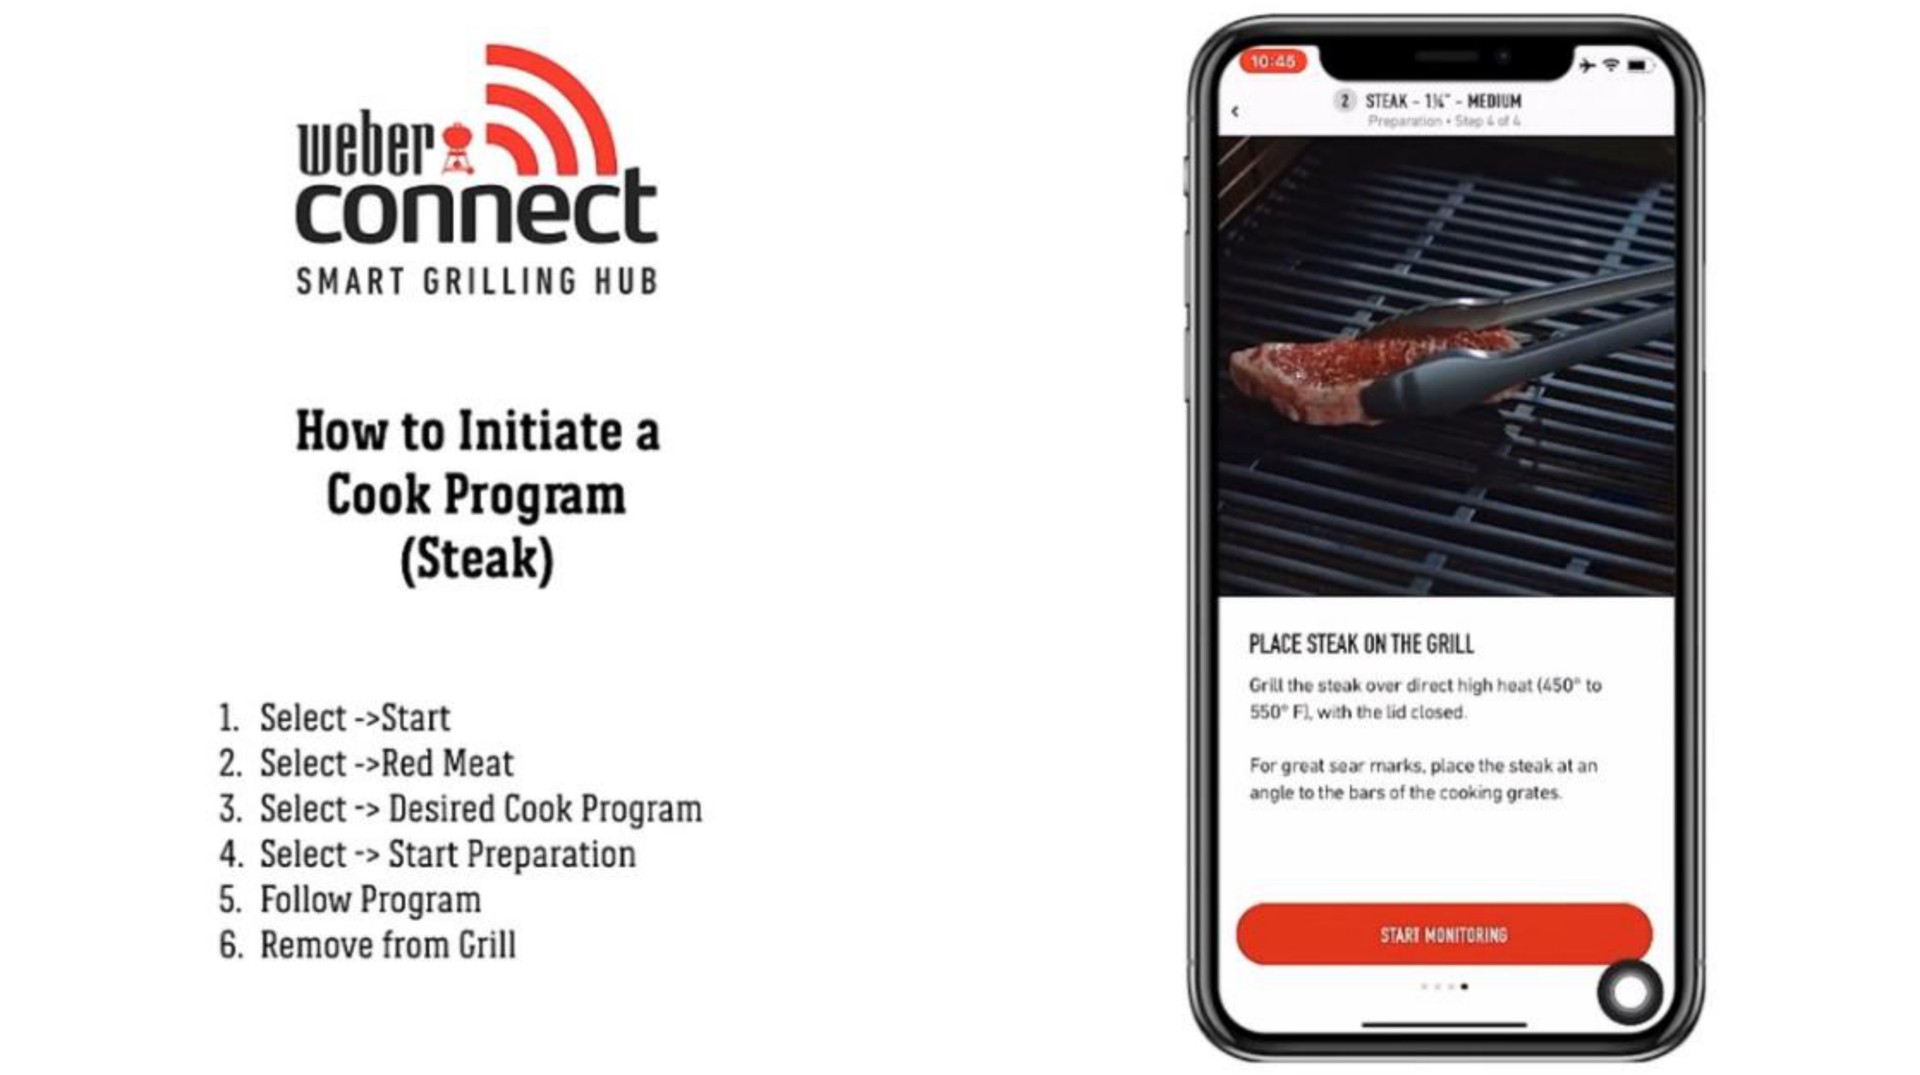 connect smart grilling hub how to initiate a cook program steak select start select red meat select desired cook program select start preparation follow program remove from grill to with the lid closed grill the steak over direct high heat place steak on the grill for great sear place the steak an angle to the bars of the cooking grates | Weber